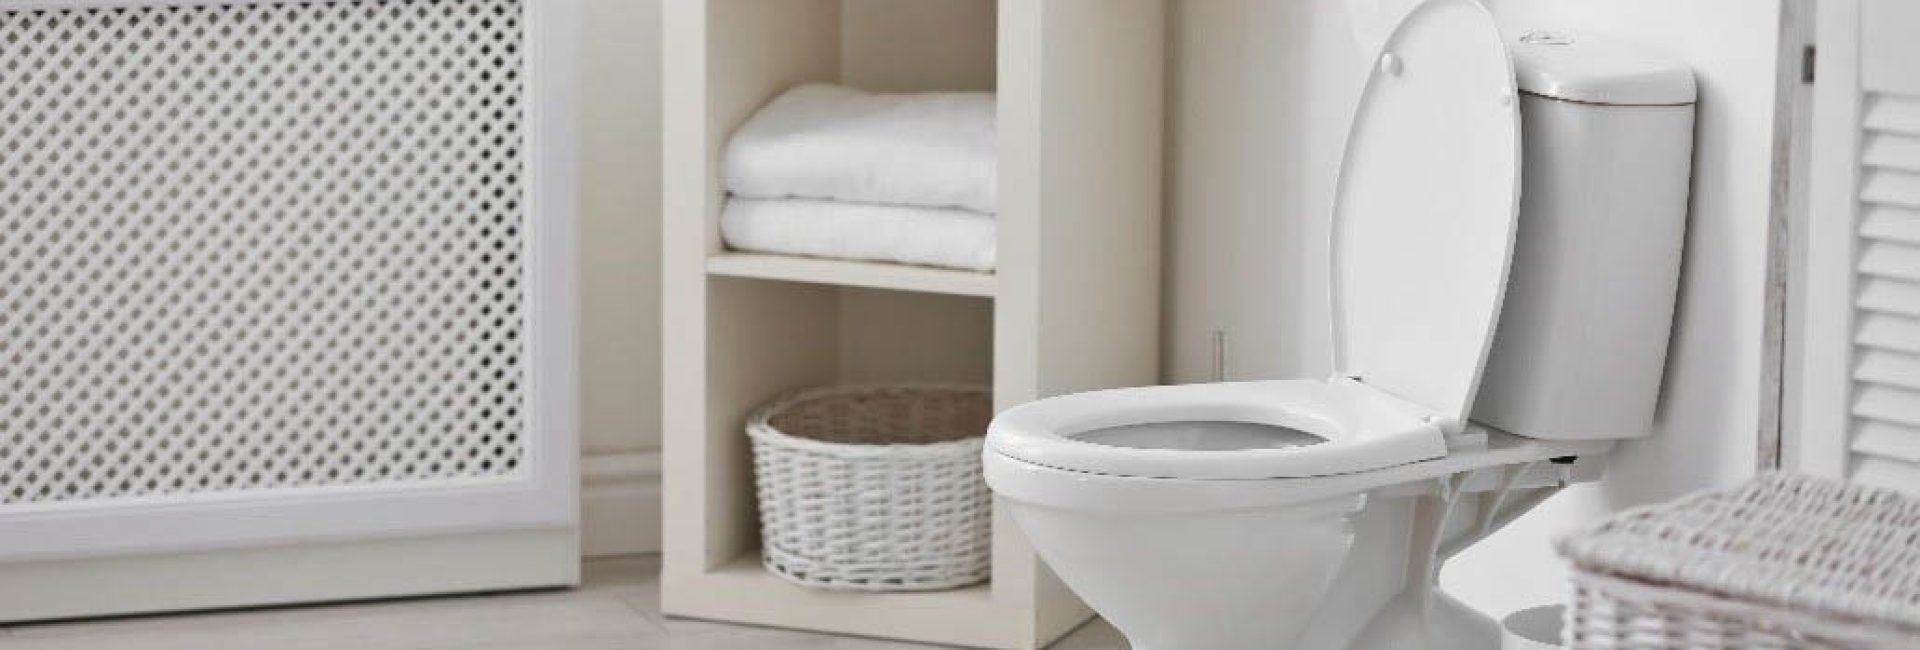 The Benefits of Water Efficient Toilets